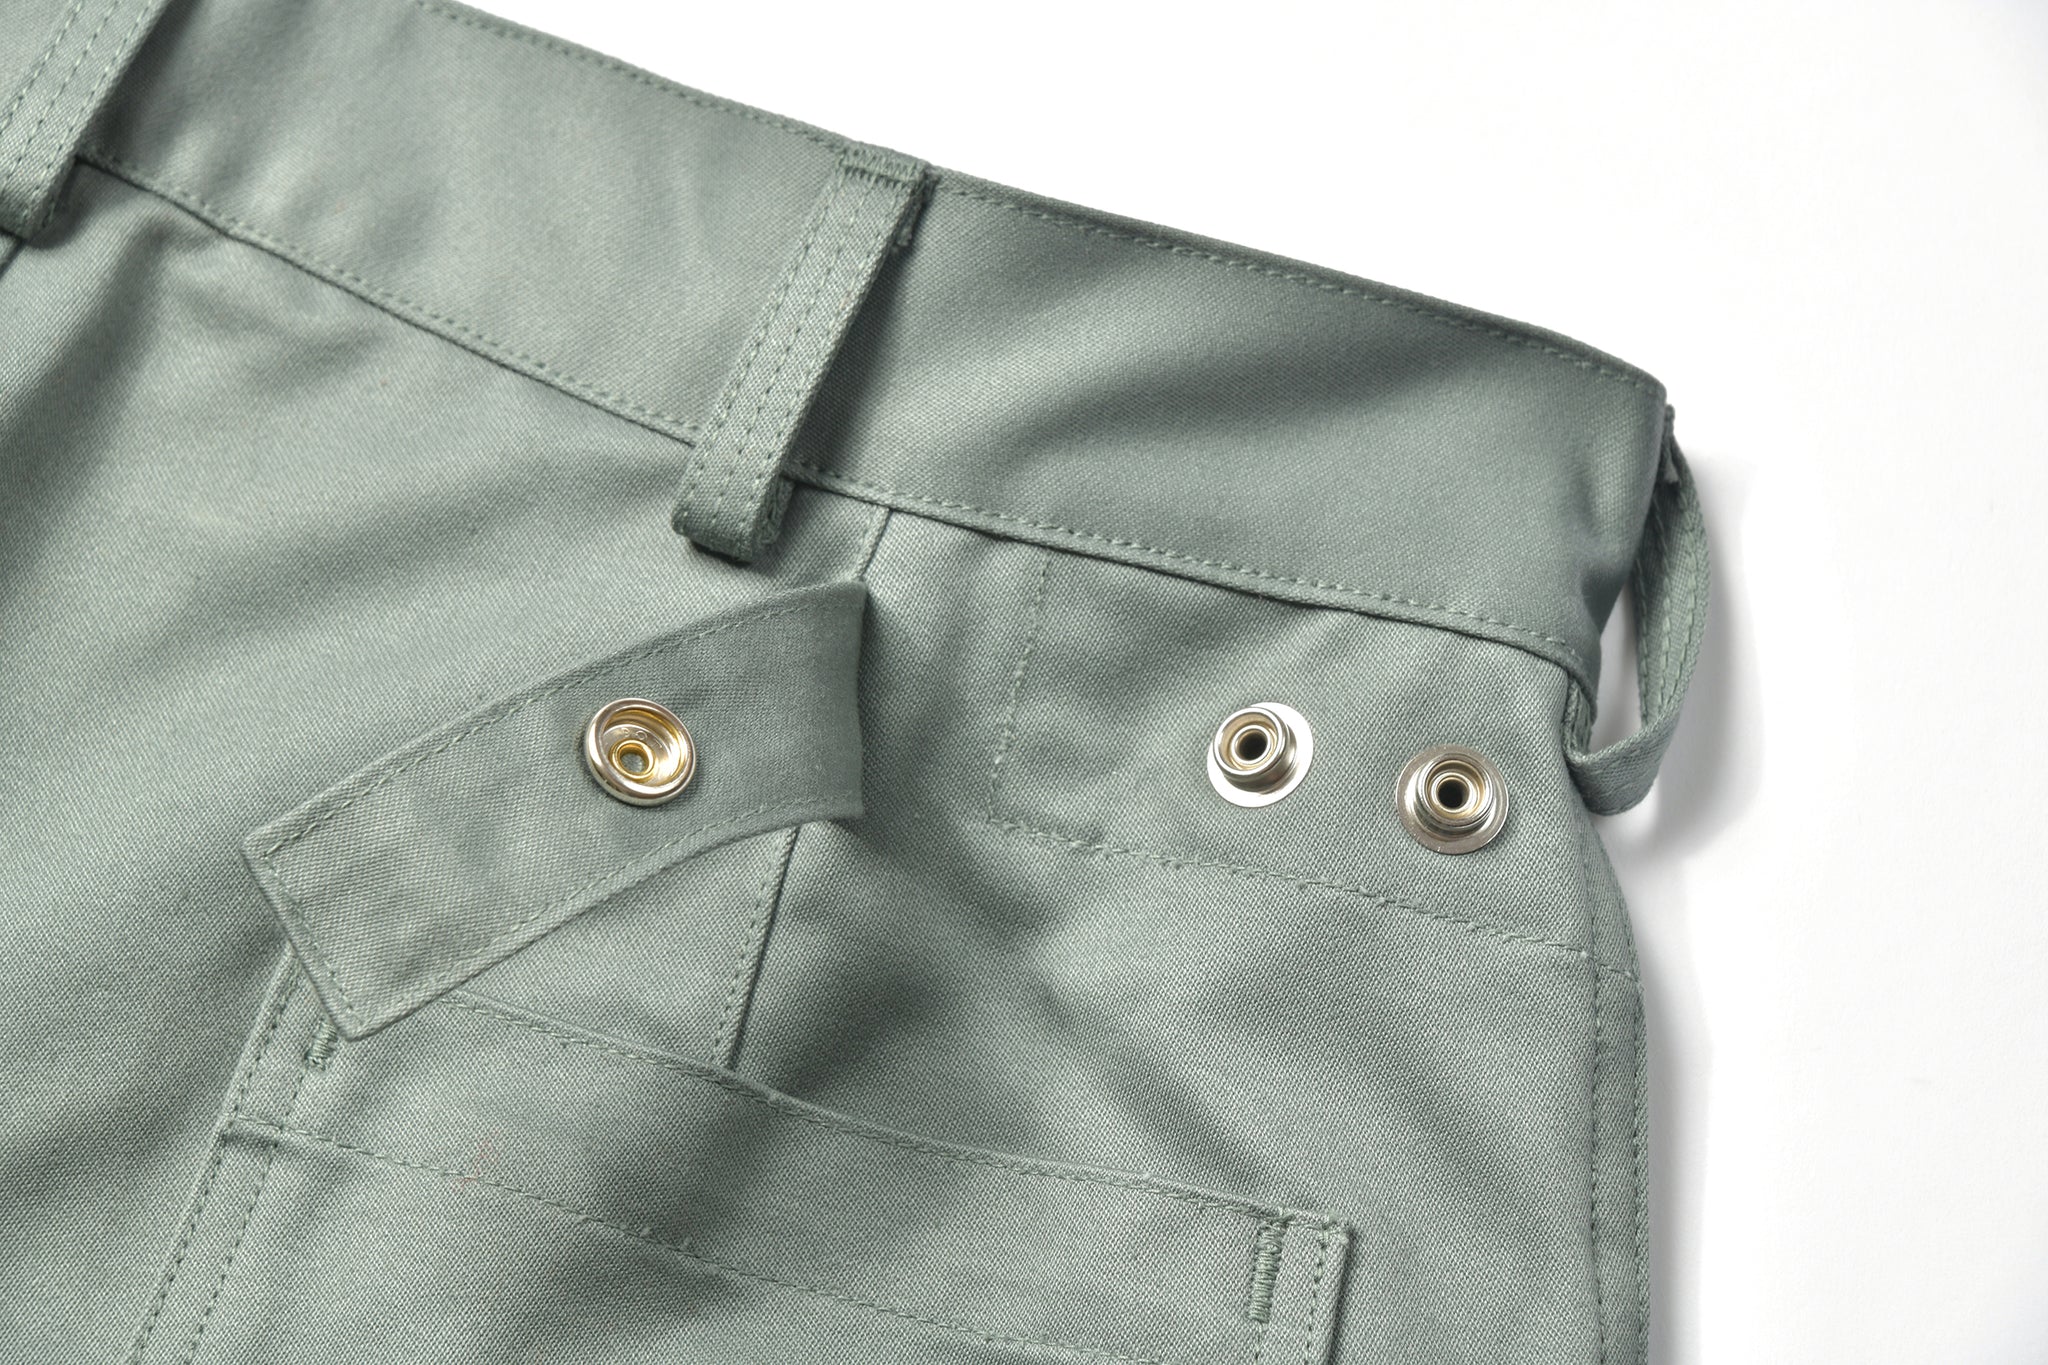 TROUSERS, UTILITY, COTTON / USAF SAGE GREEN